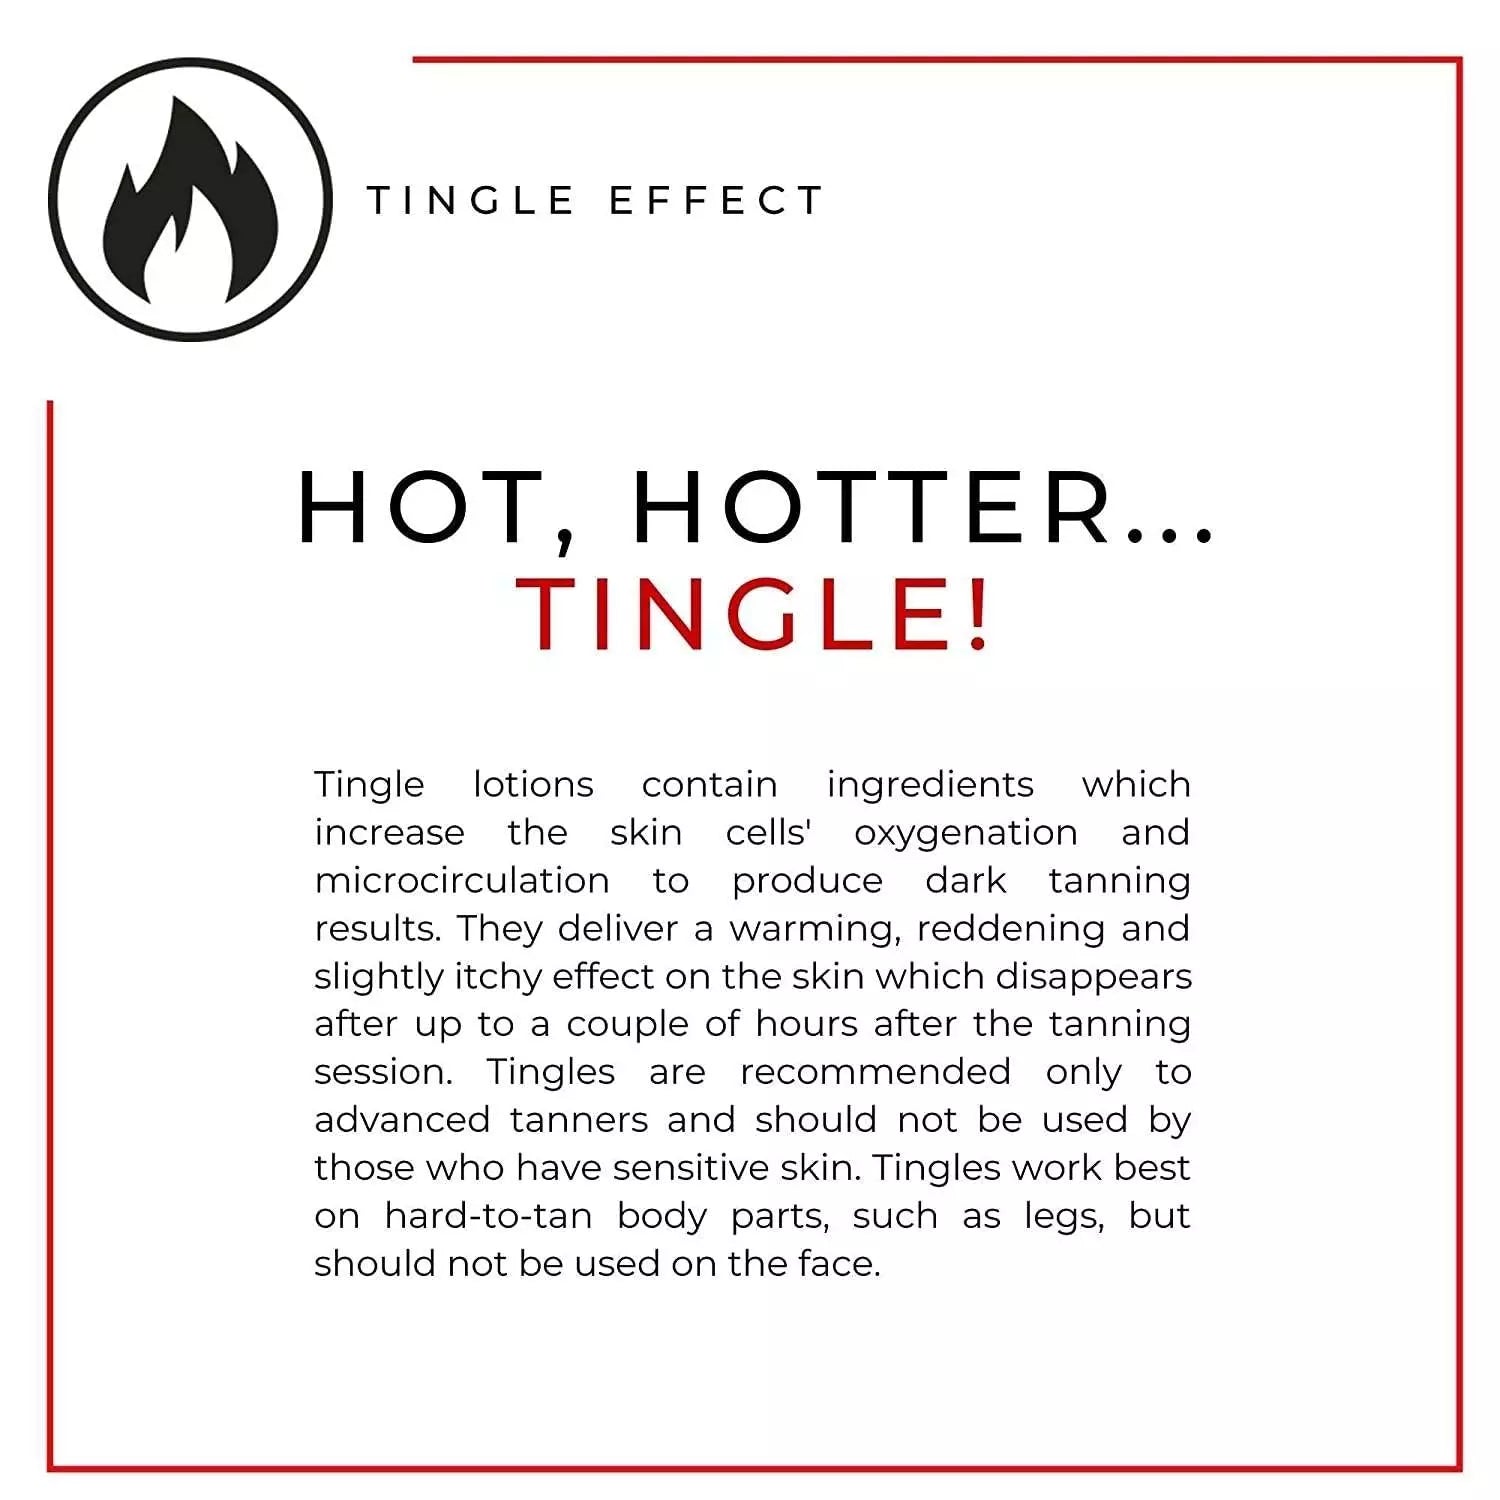 Tingle tanning lotion - how tingle tanning works?